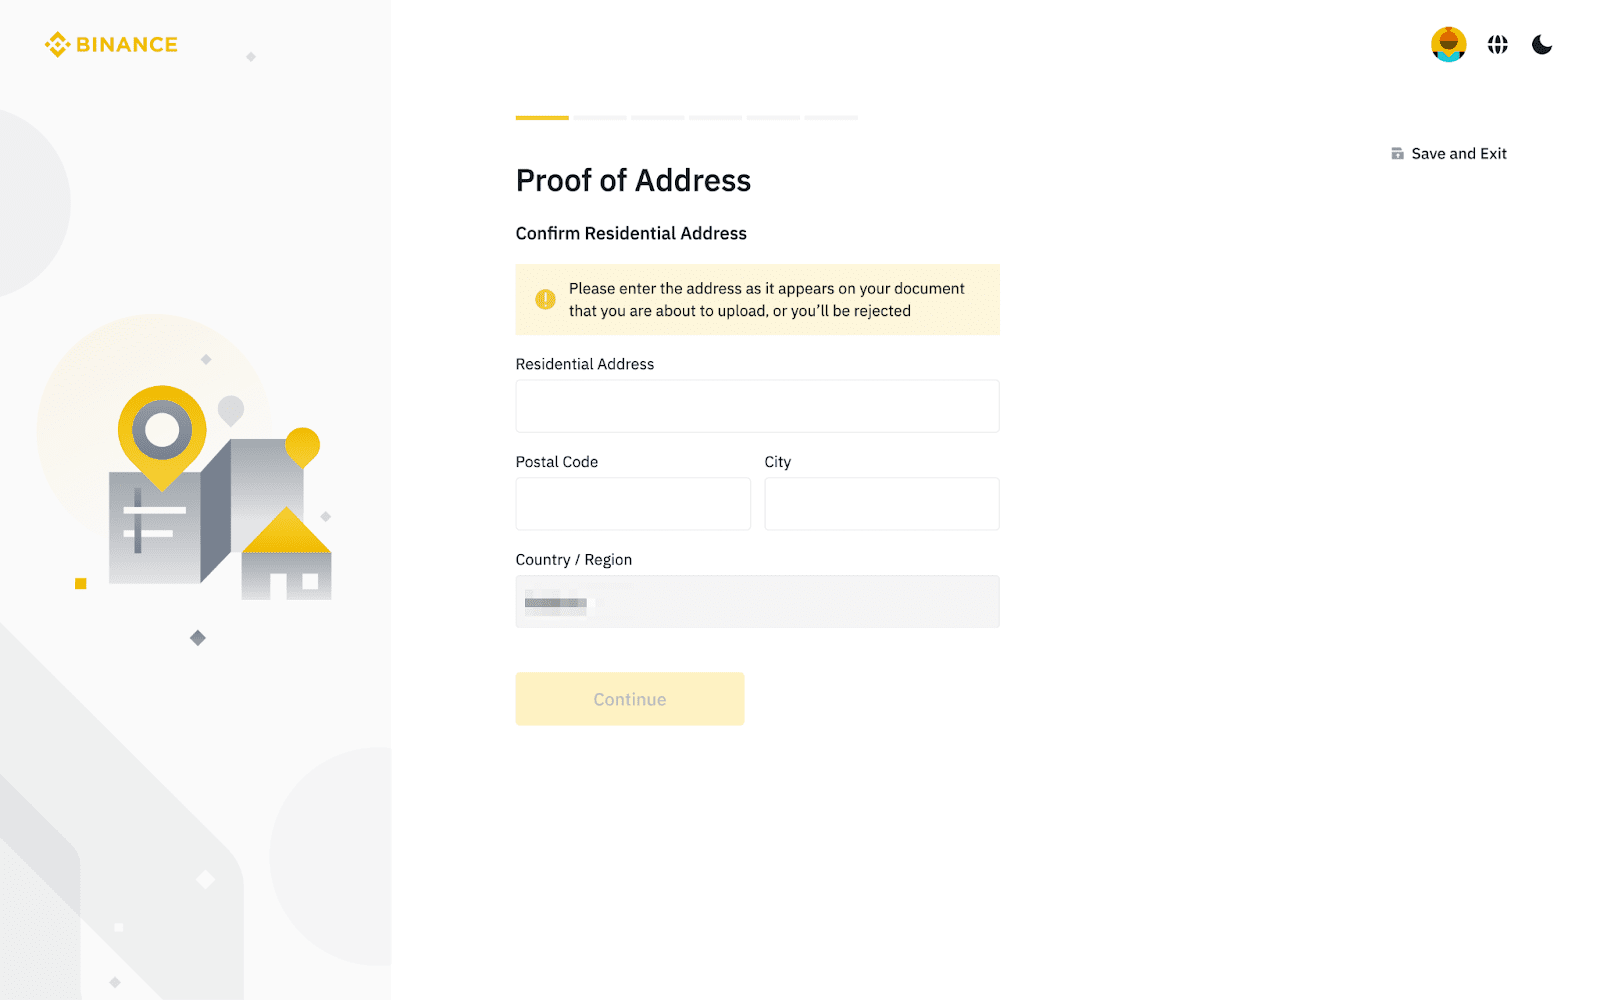 KYC Verification for Binance Users and Crypto Industry - Sanction Scanner